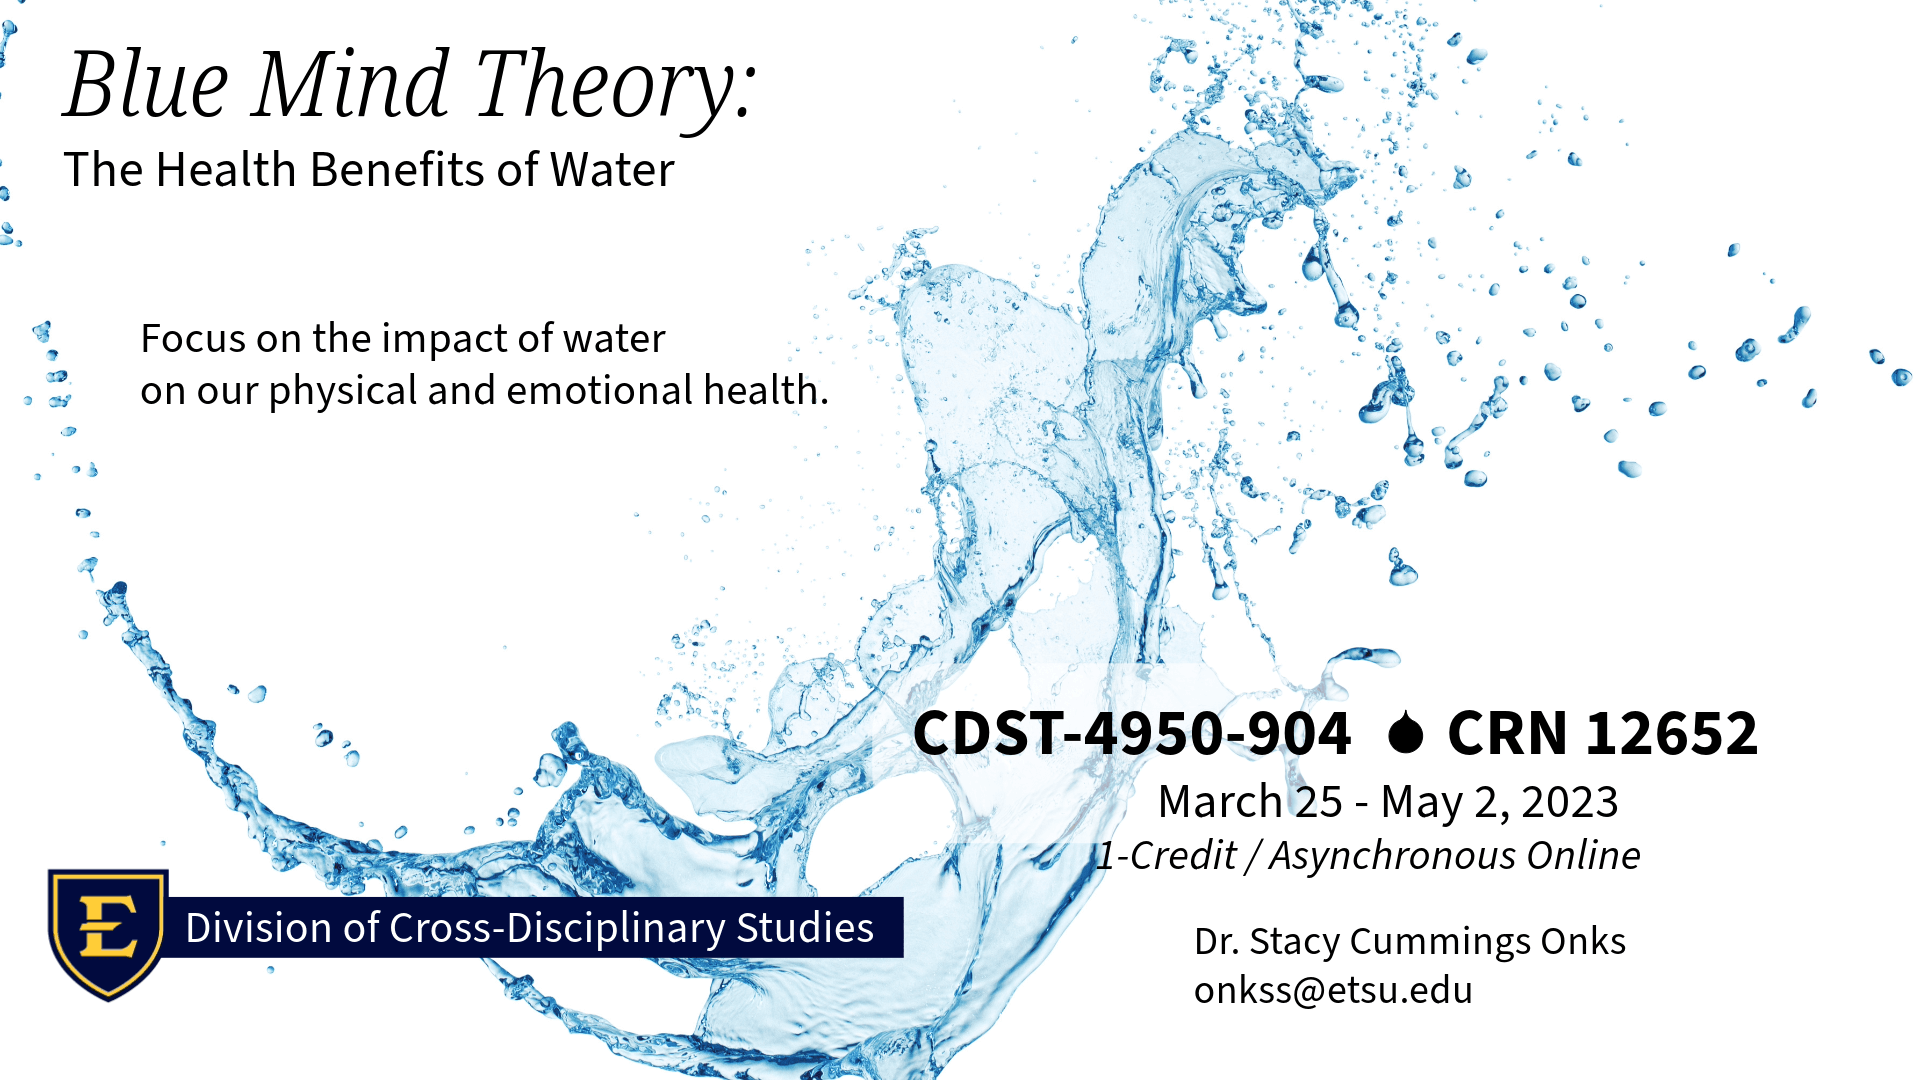 Blue Mind Theory: The Health Benefits of Water